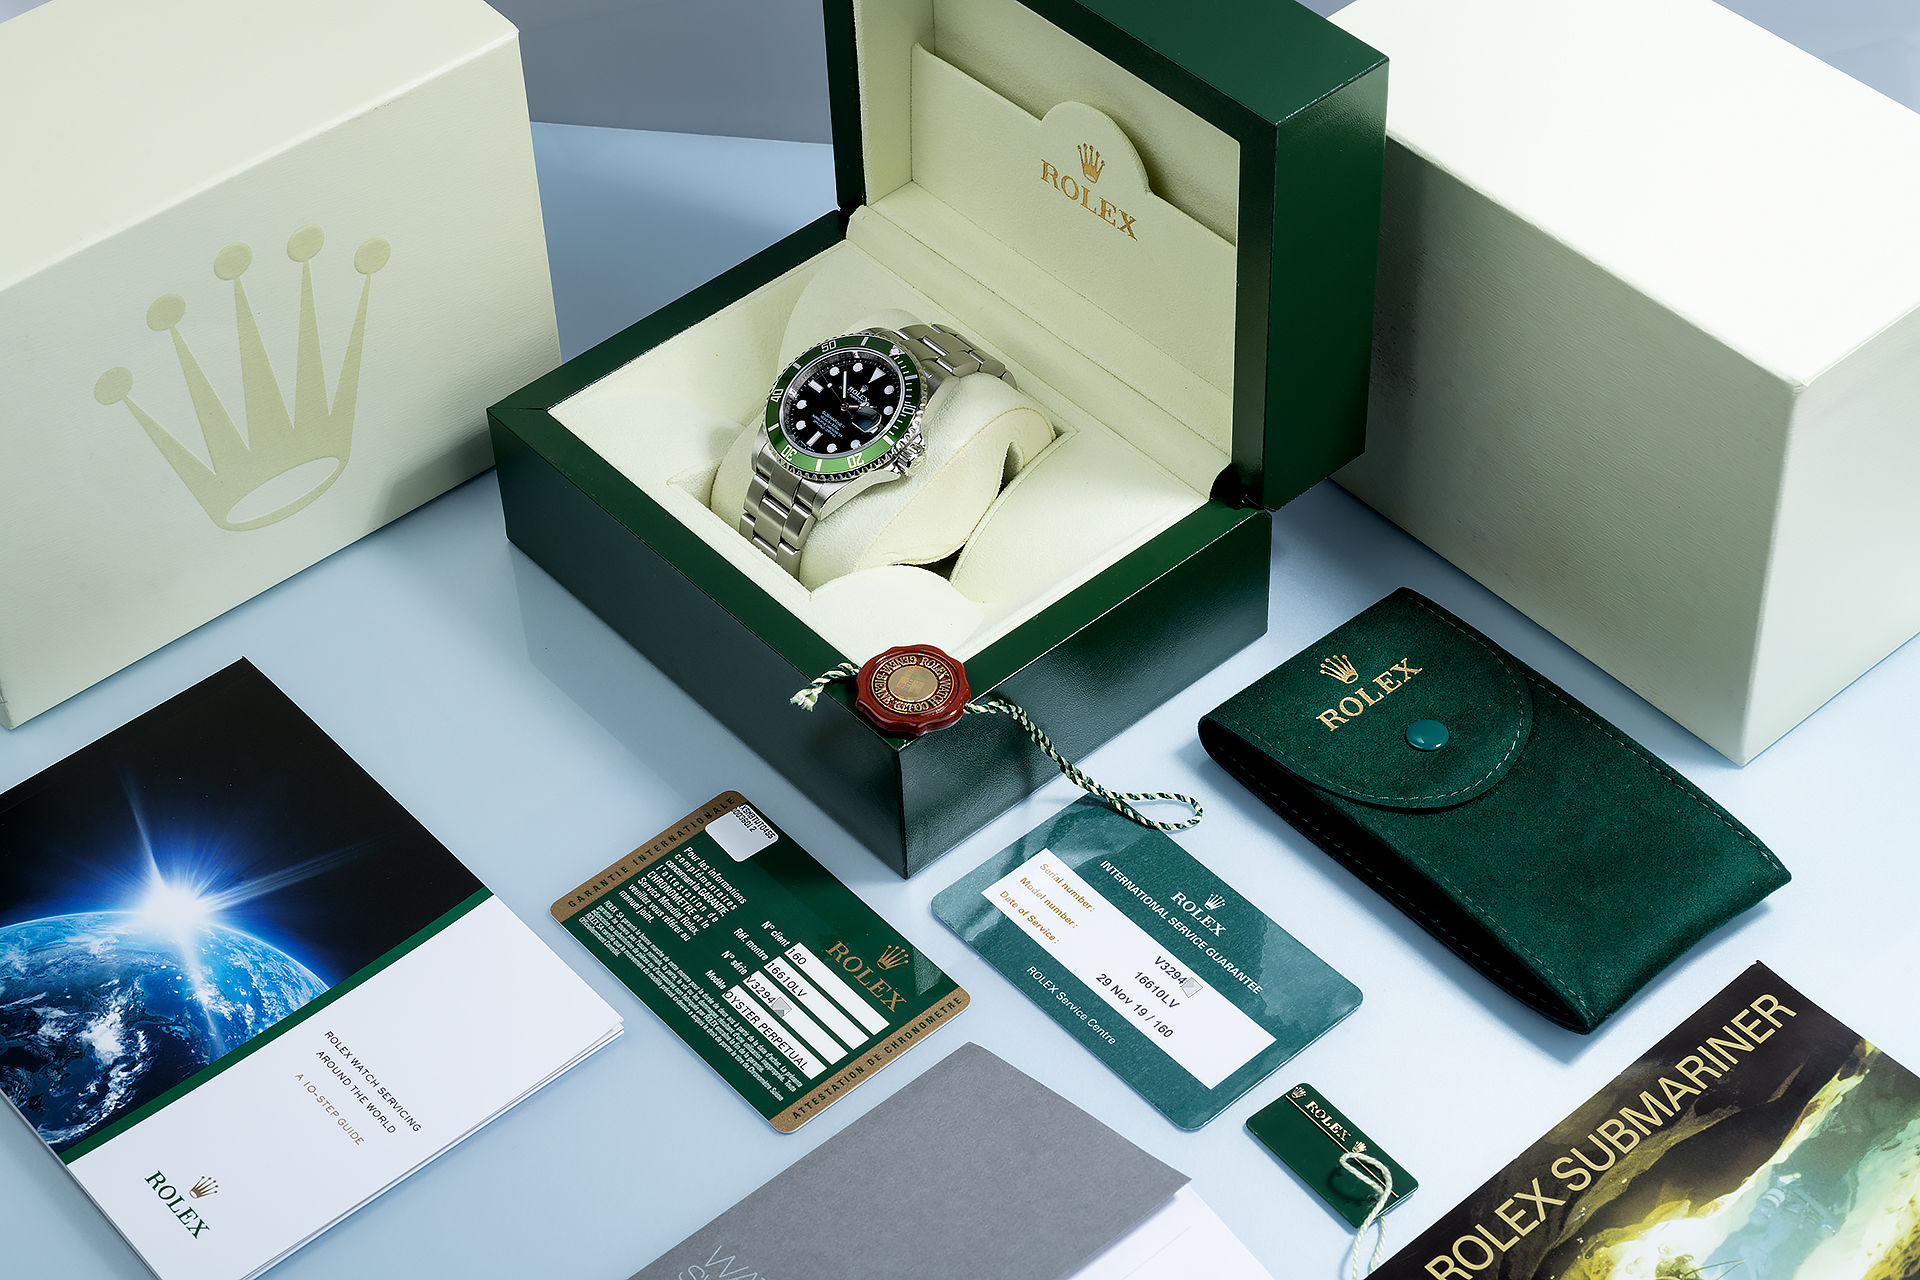 ref 16610LV | 'Complete Set' Box & Papers | Rolex Submariner Date